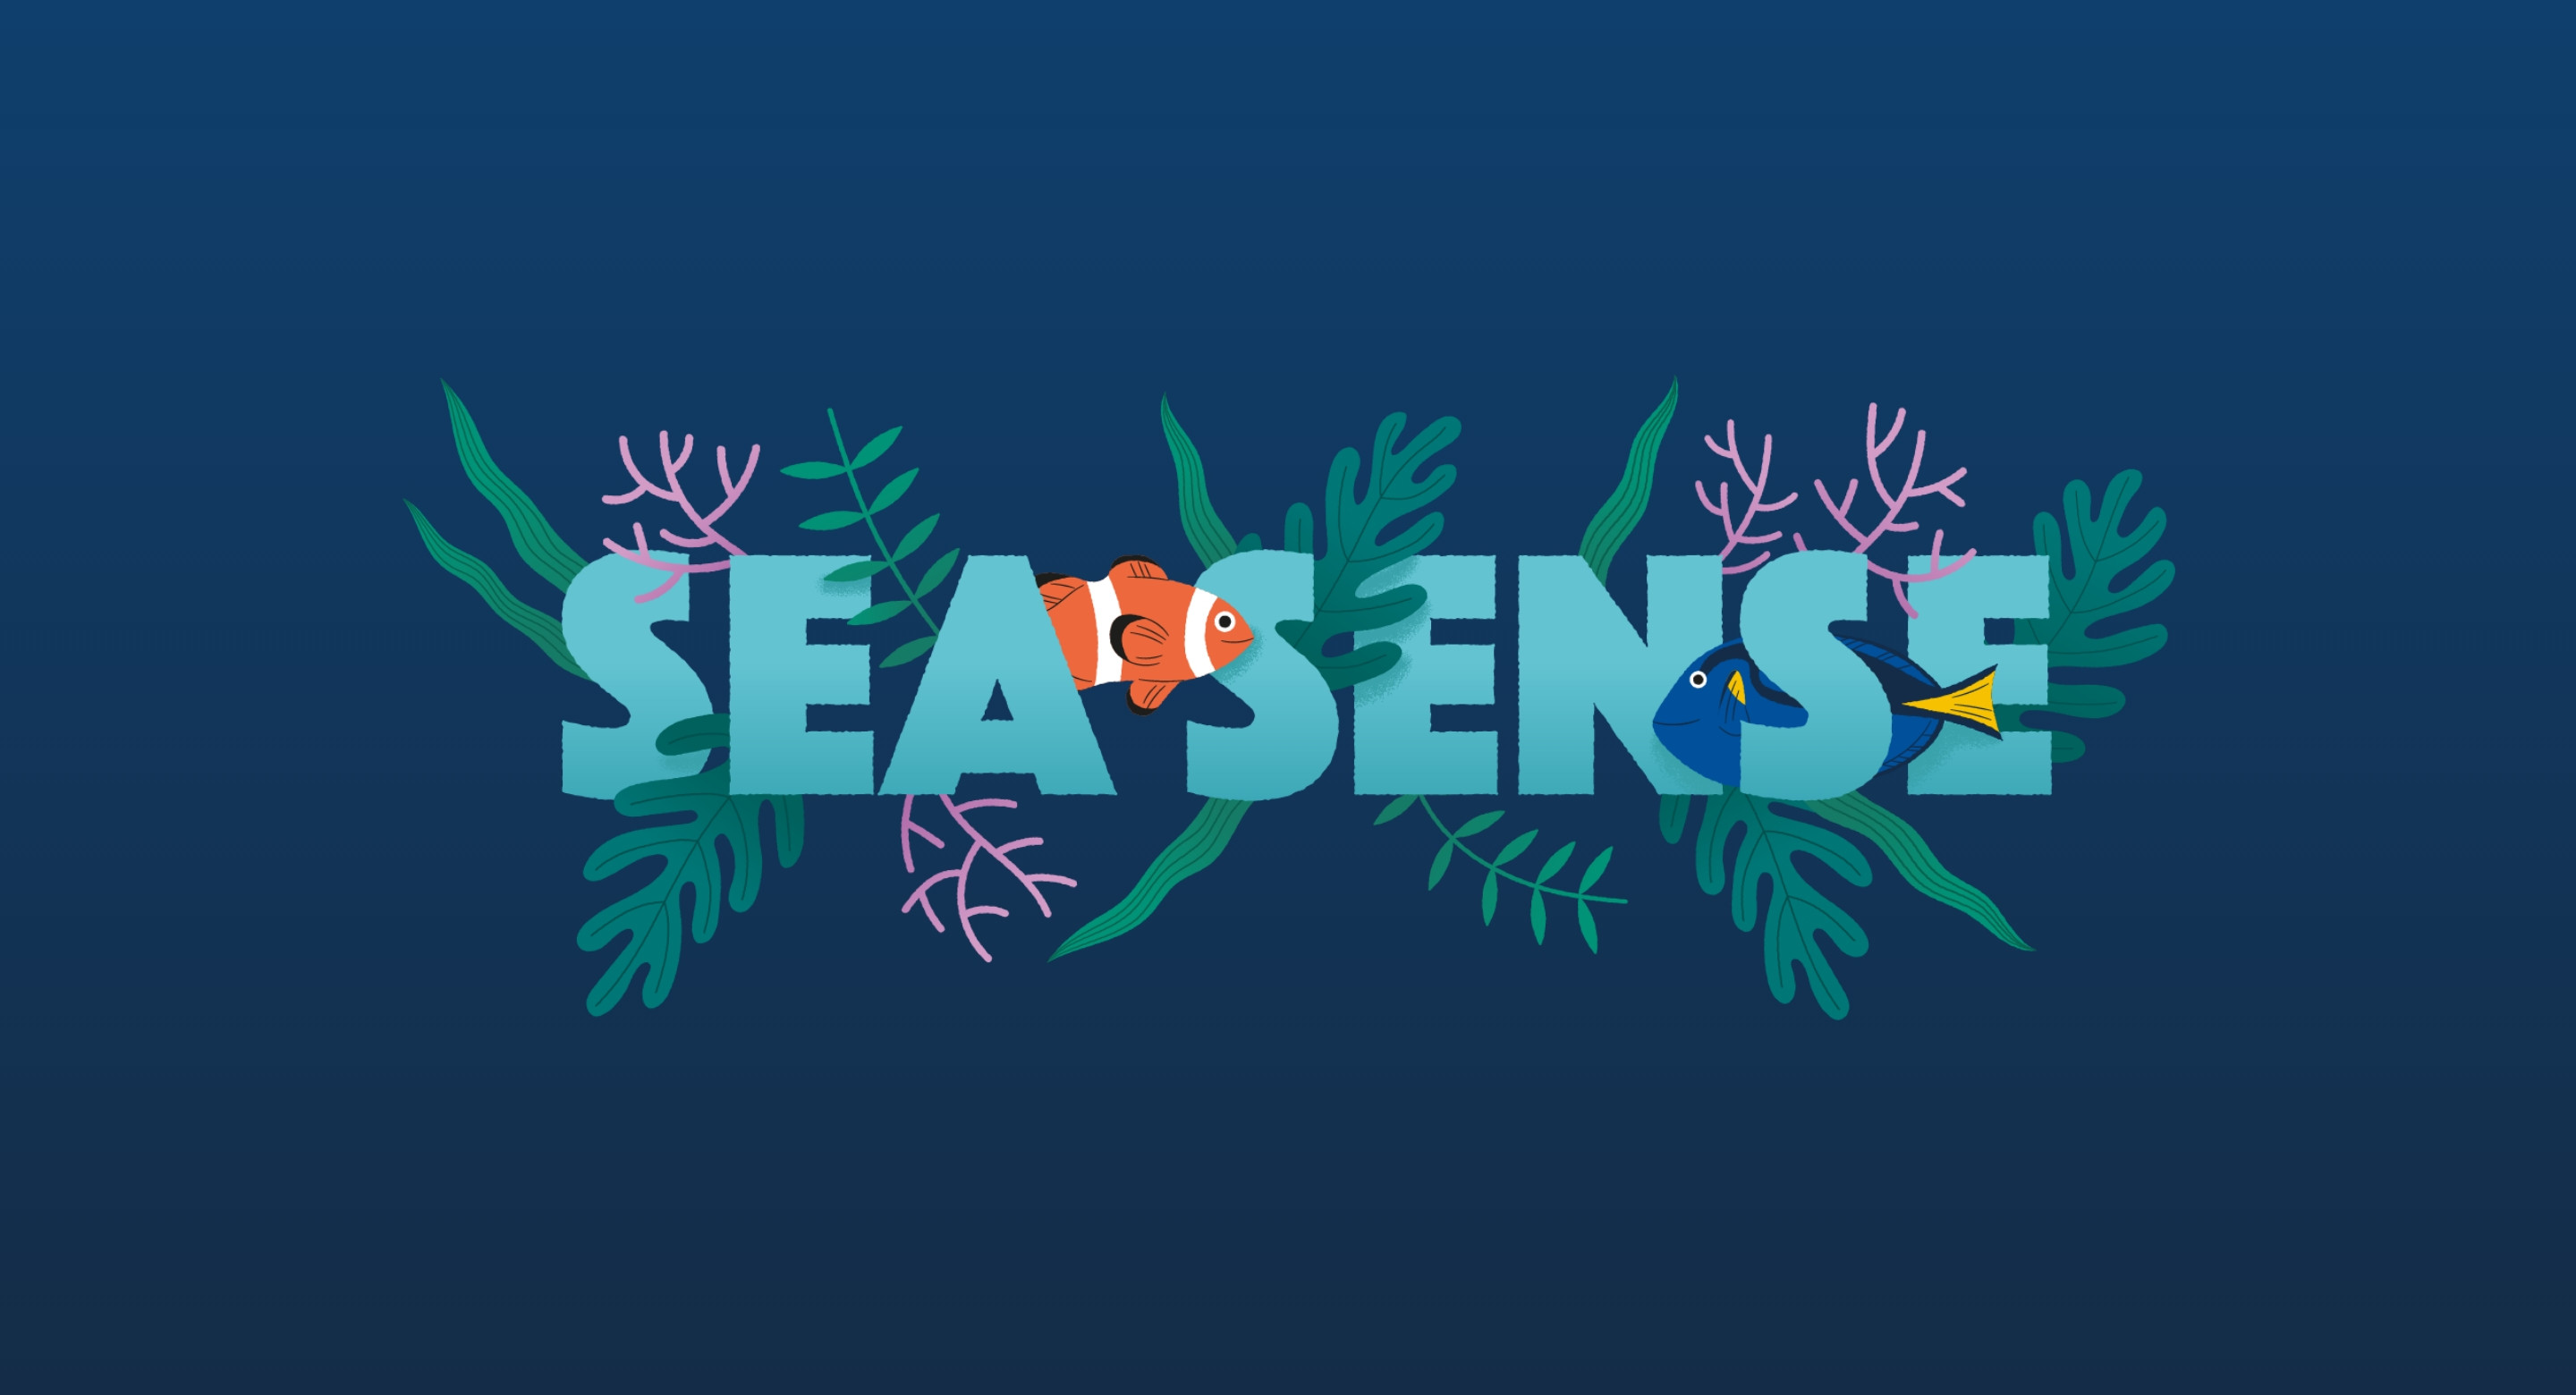 Concrete Youth charity Sea Sense branding coral illustration by Root Studio